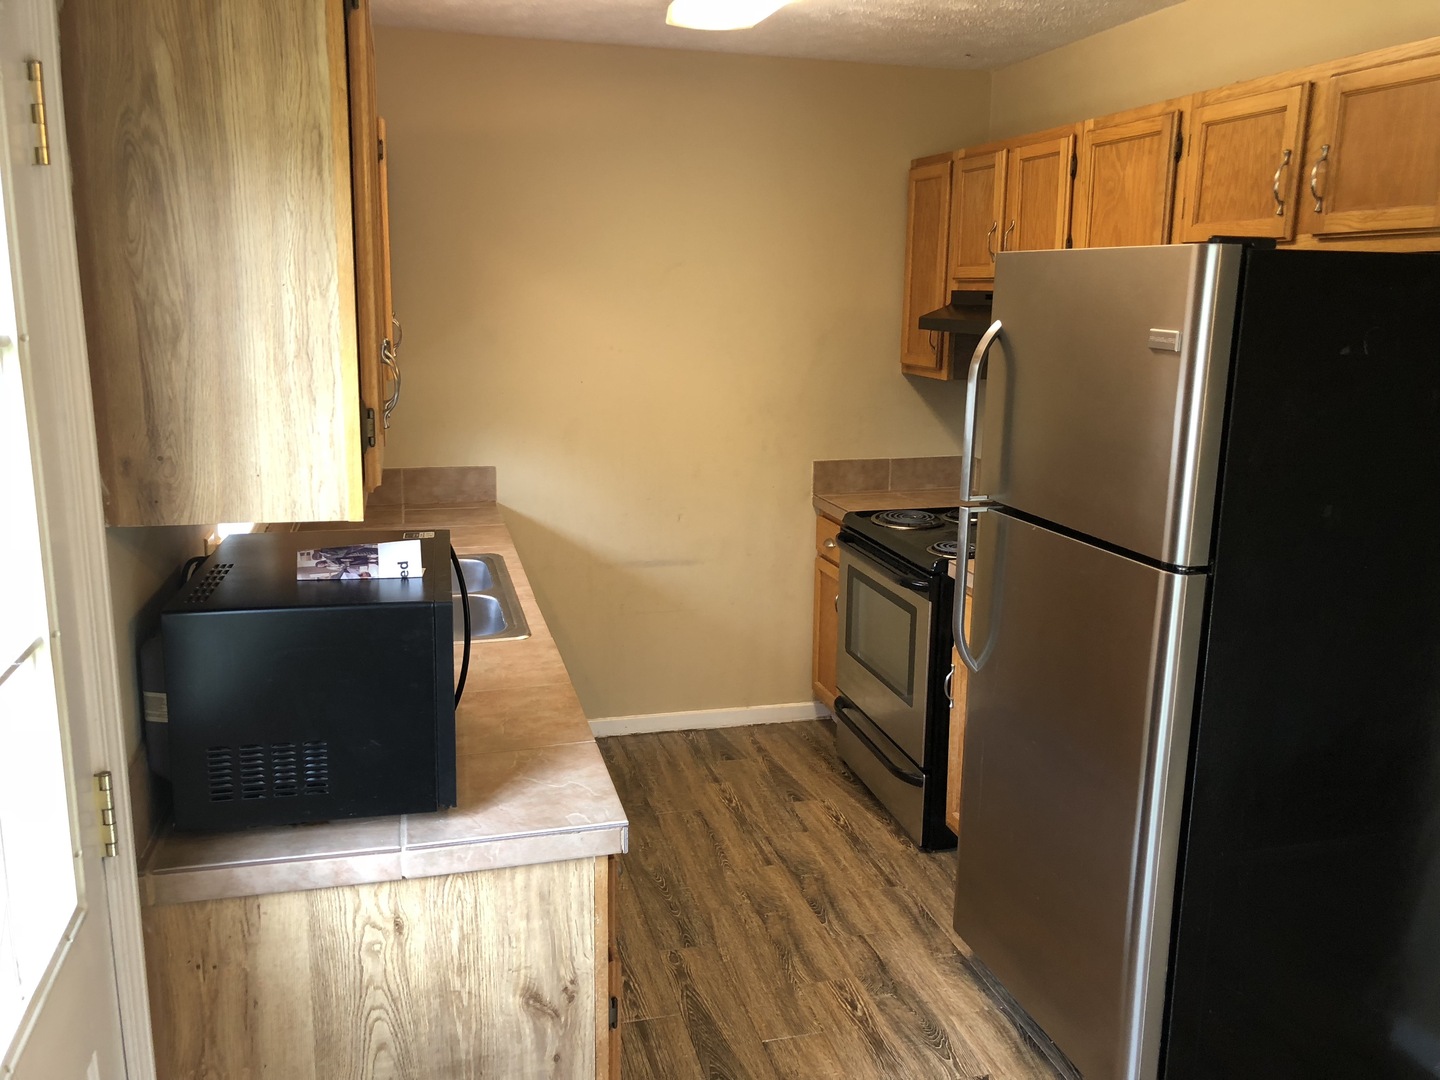 2 Bed / 2 Bath Home For Rent in Pearl